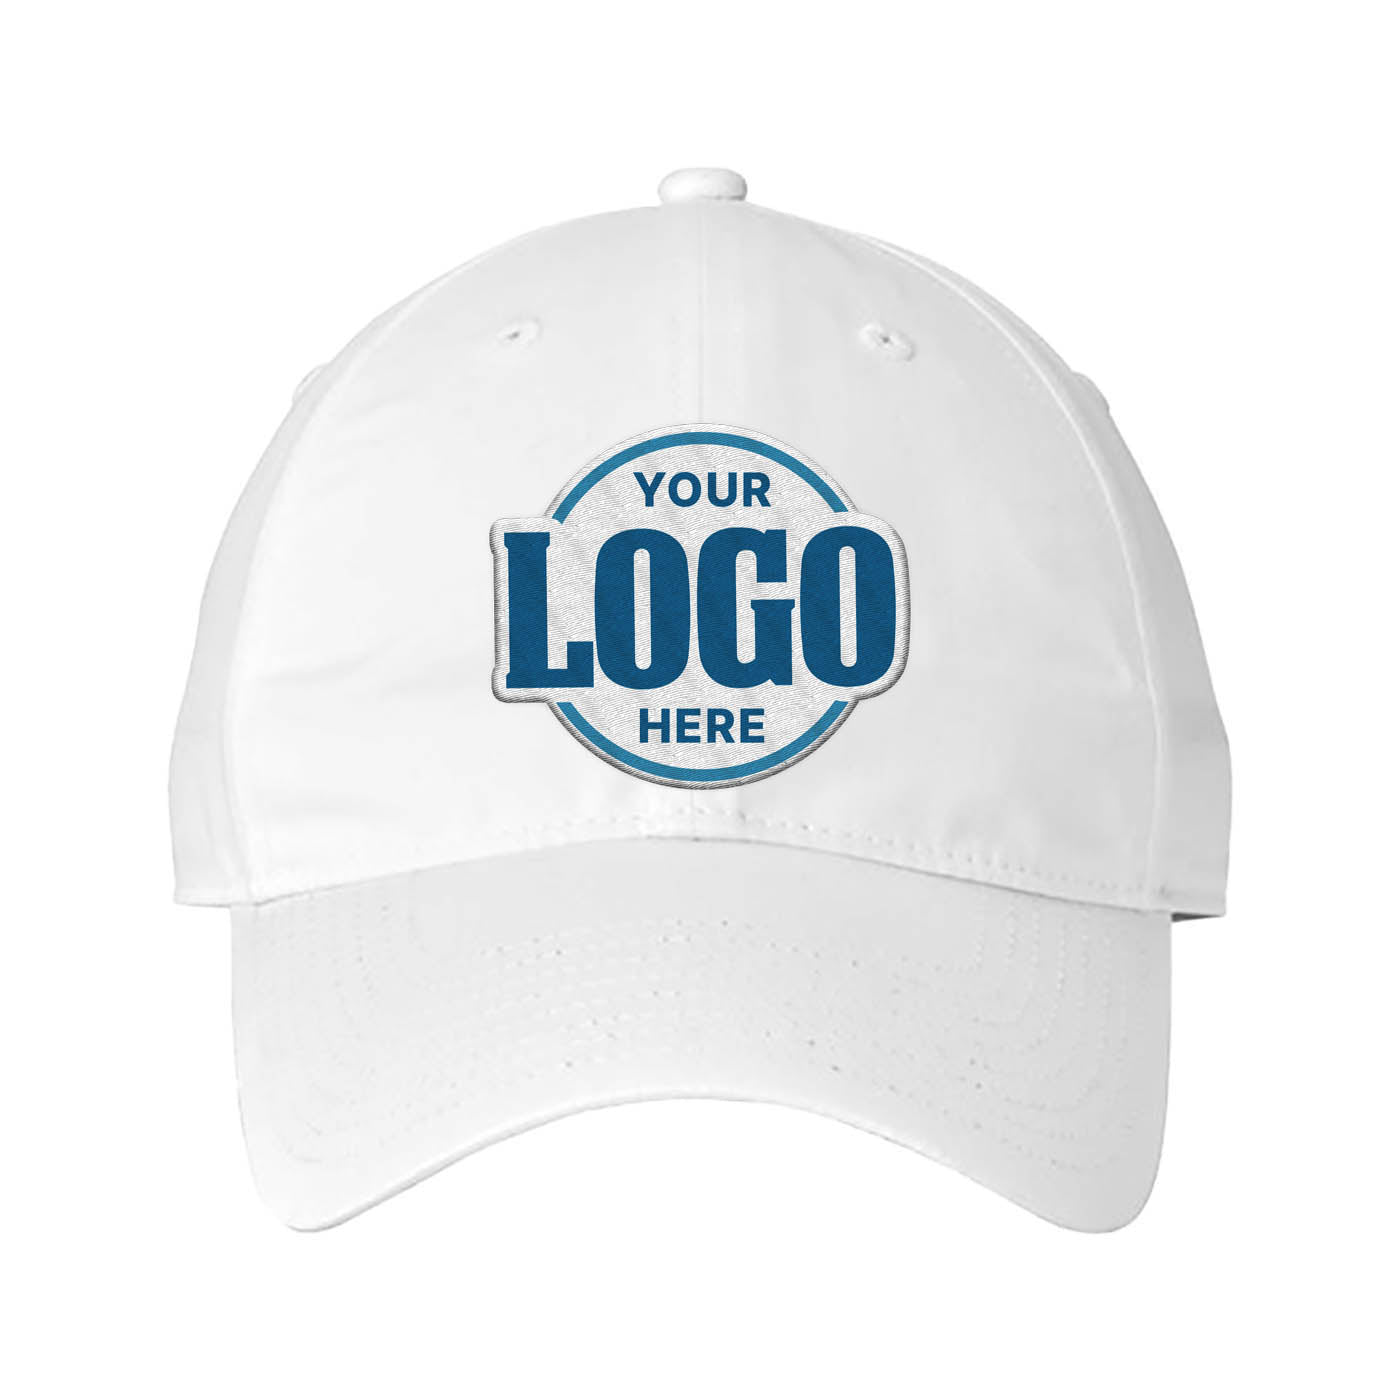 Custom Embroidered Nike NKFB6449 Unstructured Cotton/Poly Twill Cap